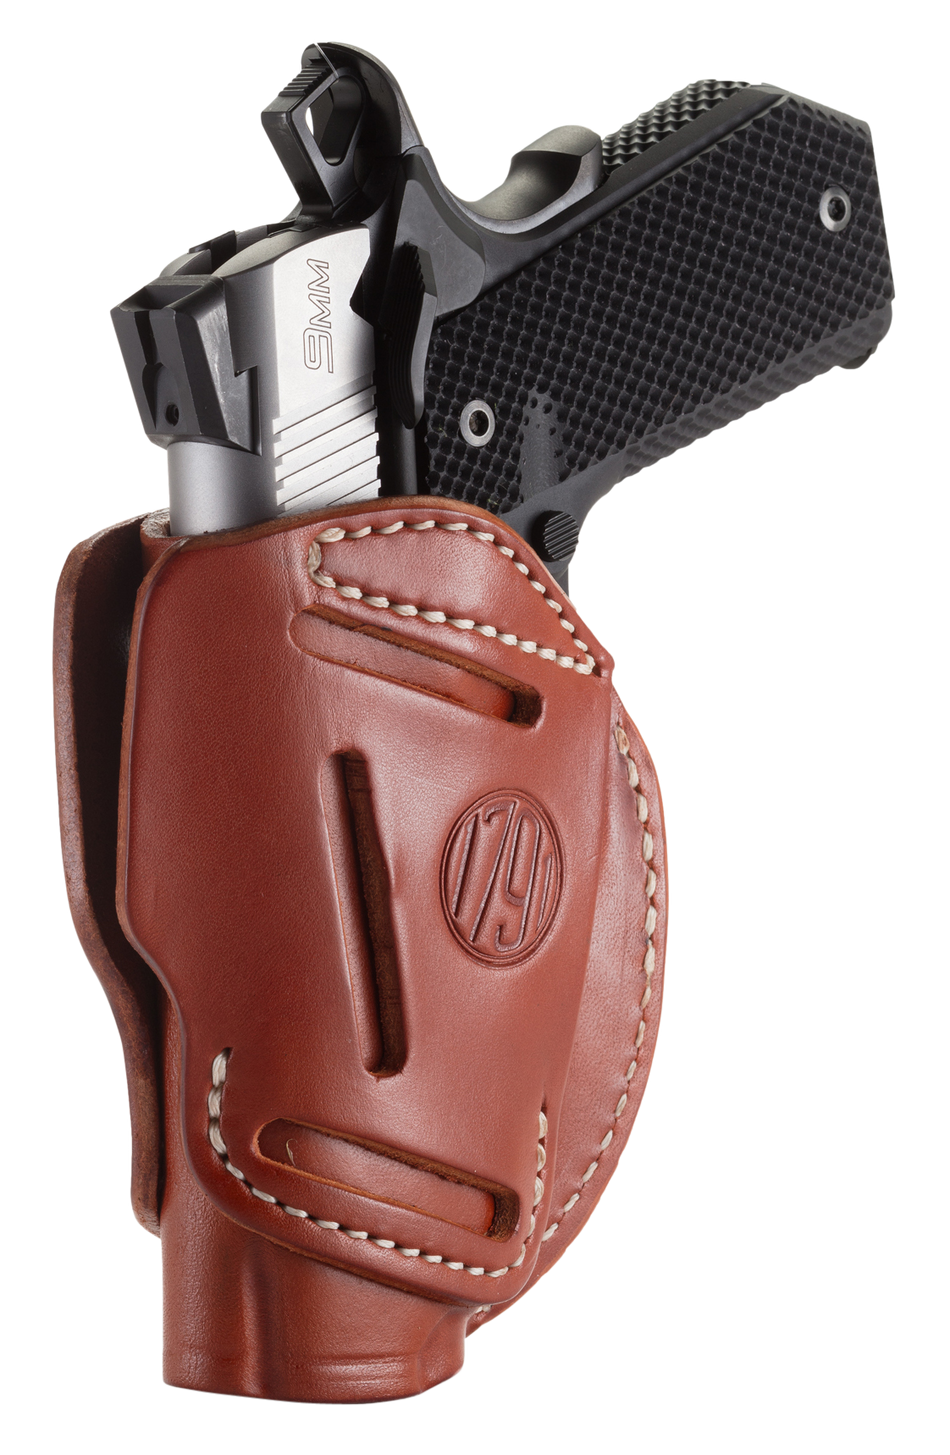 UIW Universal IWB and OWB Holster - 1791 Gunleather